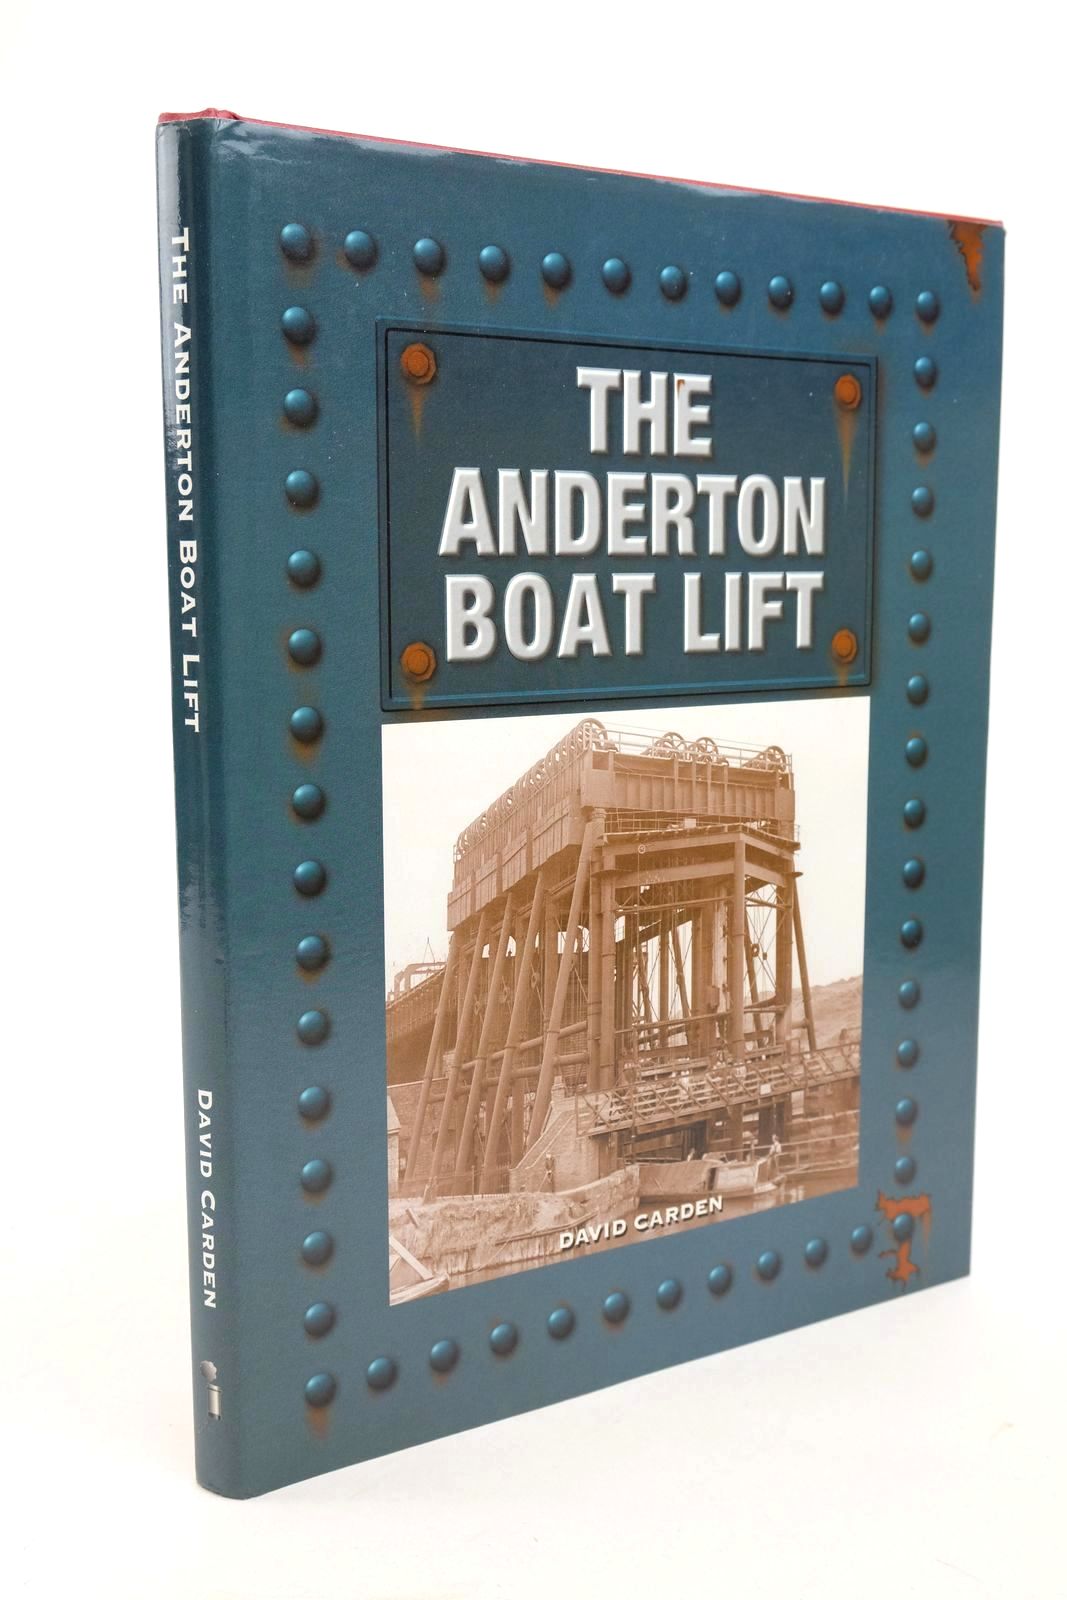 Photo of THE ANDERTON BOAT LIFT written by Carden, David published by Black Dwarf Publications (STOCK CODE: 1323165)  for sale by Stella & Rose's Books